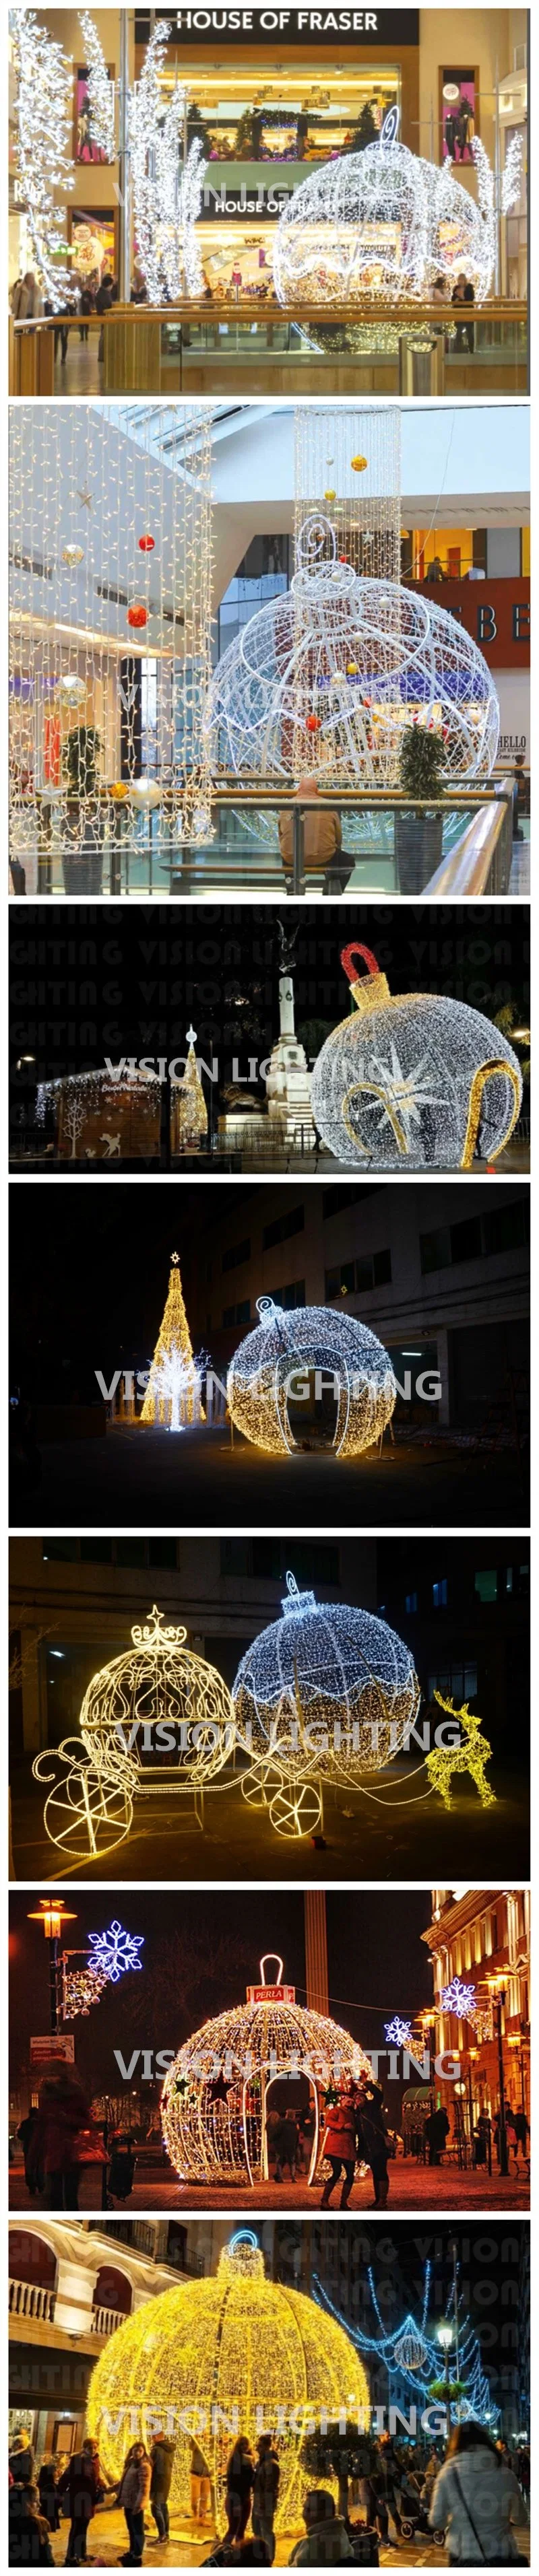 Outdoor Commercial Christmas Decoration Illuminated Giant Ball Ornament Arch Motif Lights